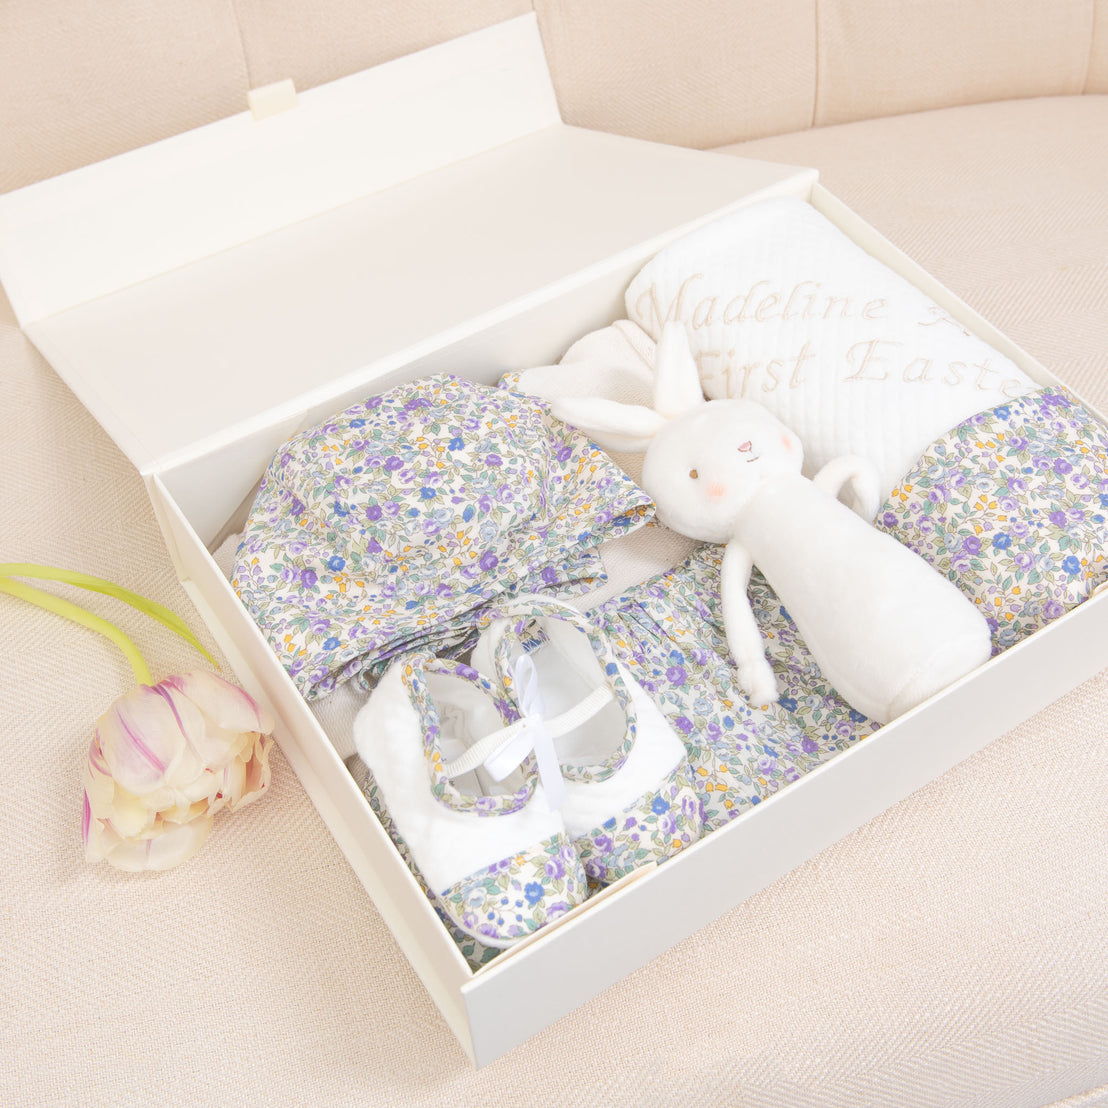 An upscale boutique Petite Fleur Gift Set containing baby items: a vintage-inspired floral dress, matching shoes, and a white bunny plush toy. A ribbon and custom tag read "Madeline's First Easter". Save 10%